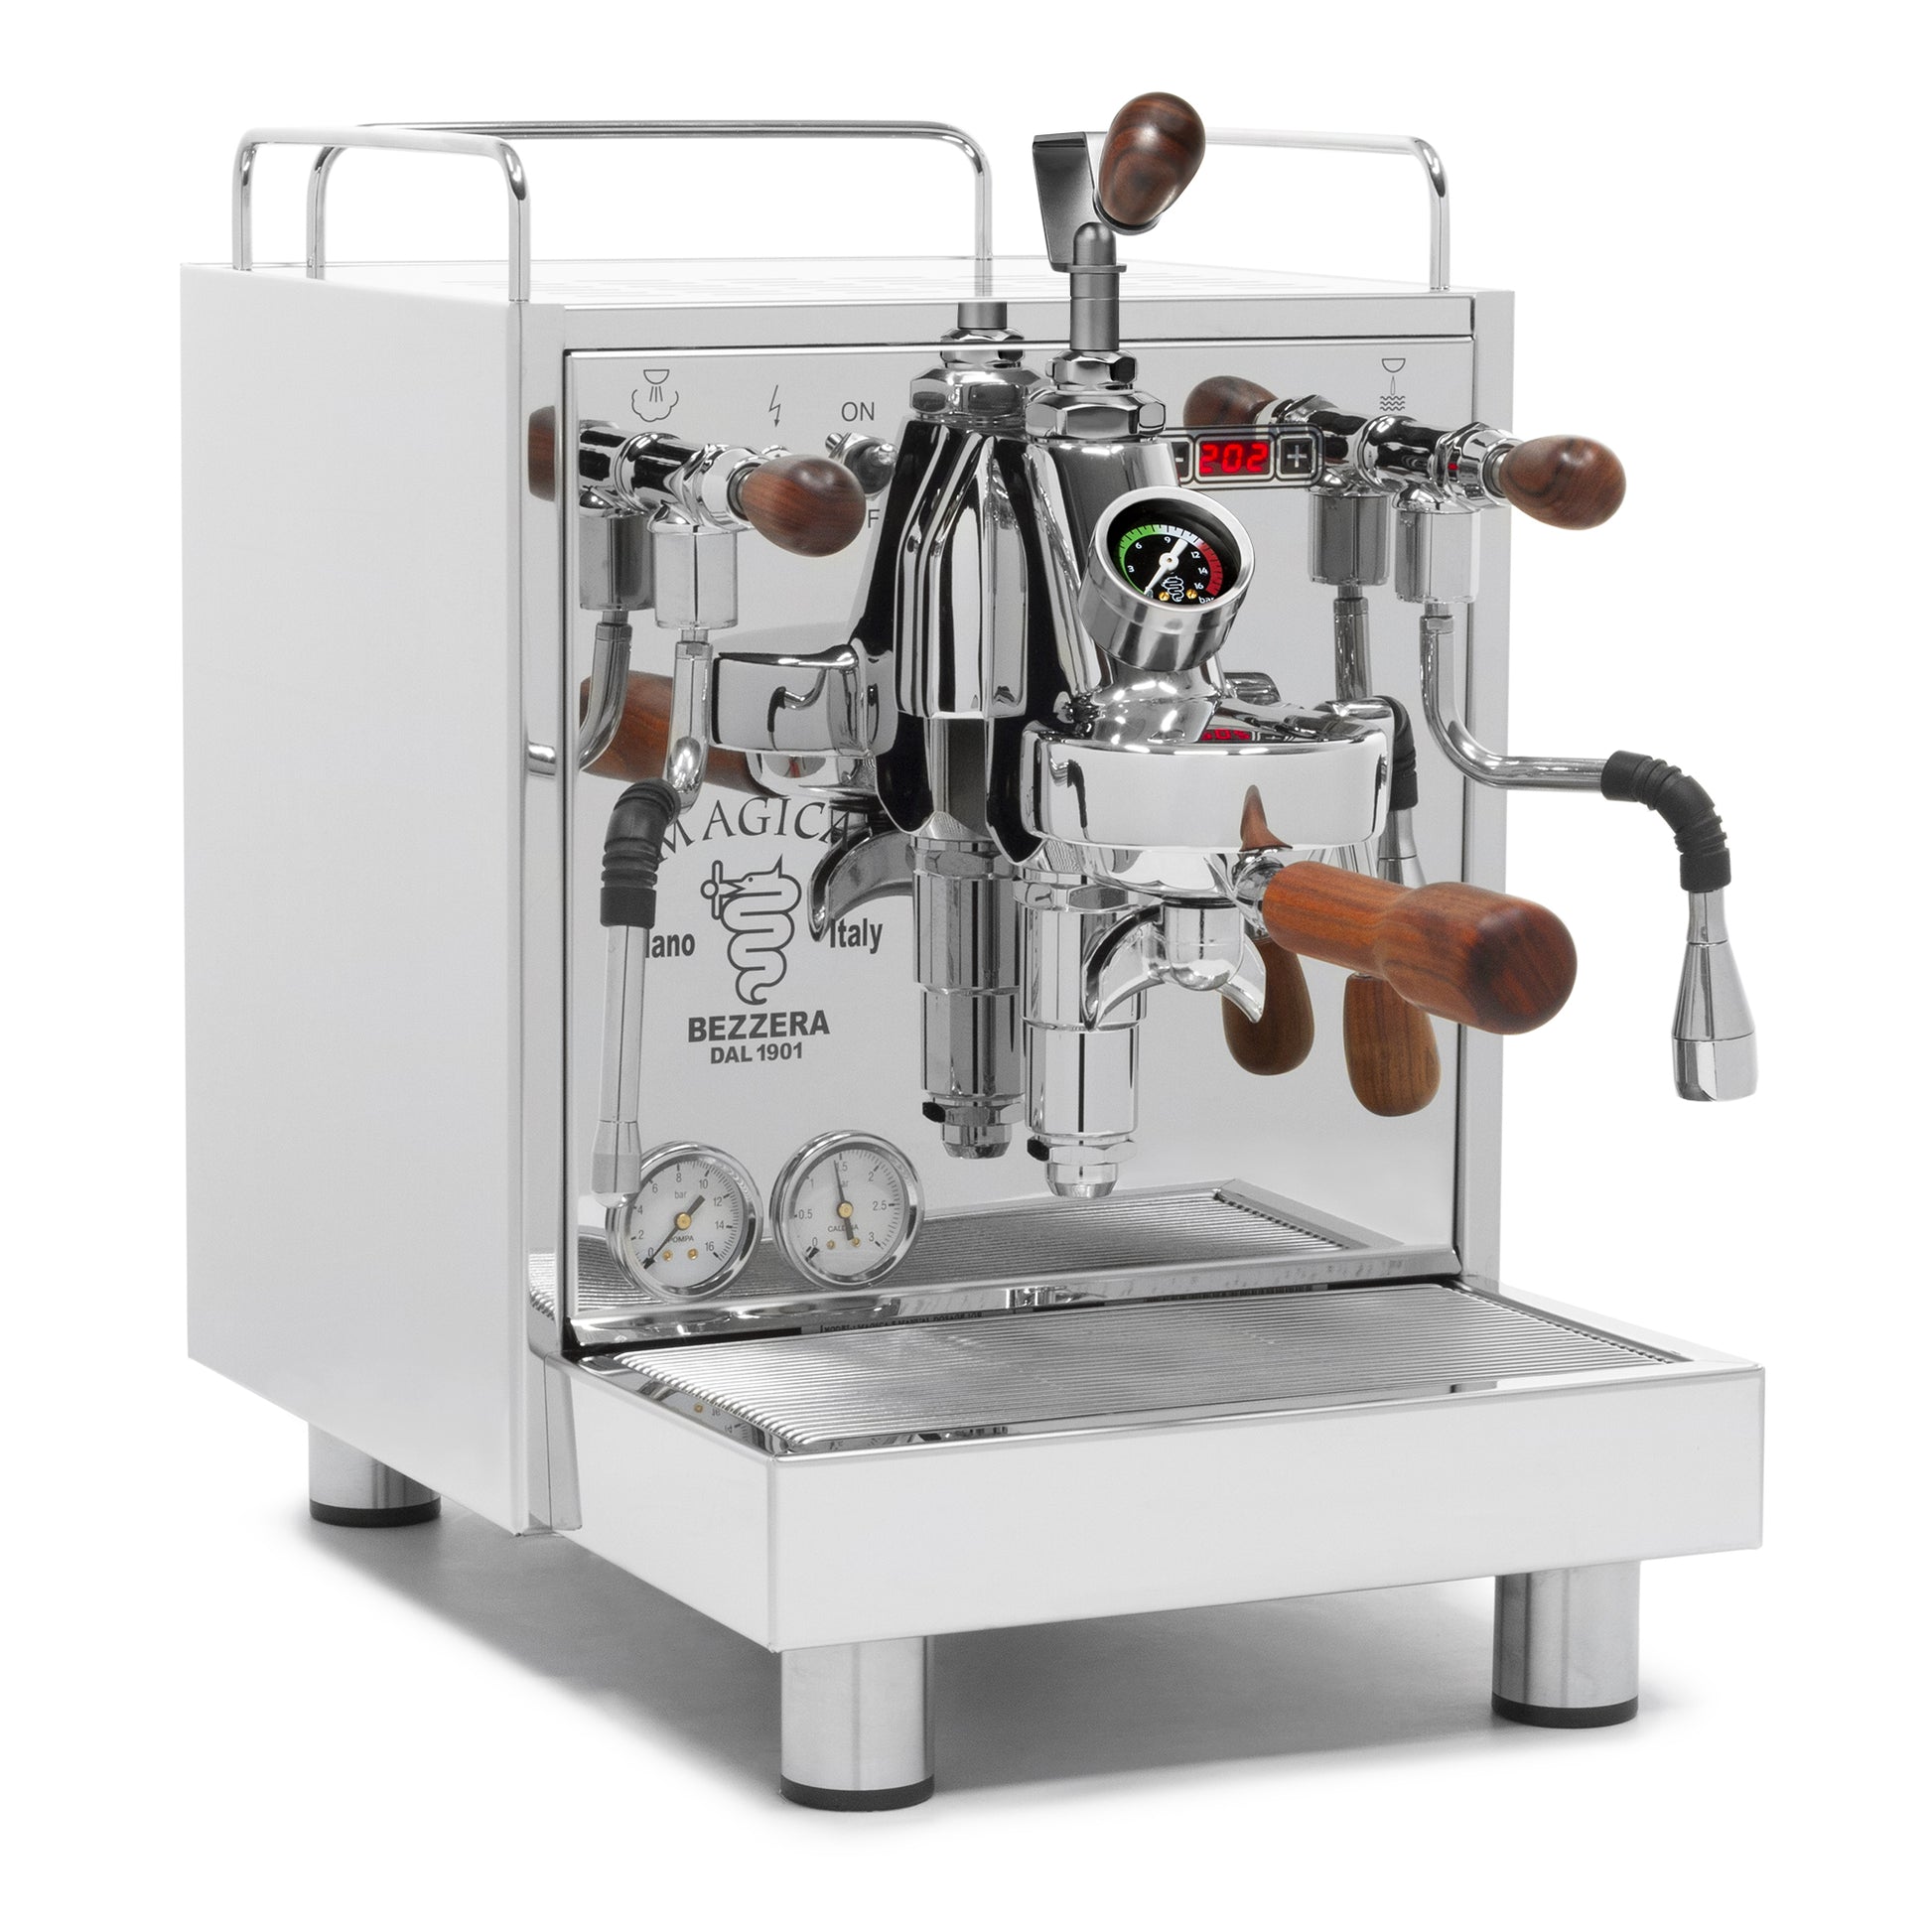 14 Inch Indian Espresso Coffee Machine Gas And Electric